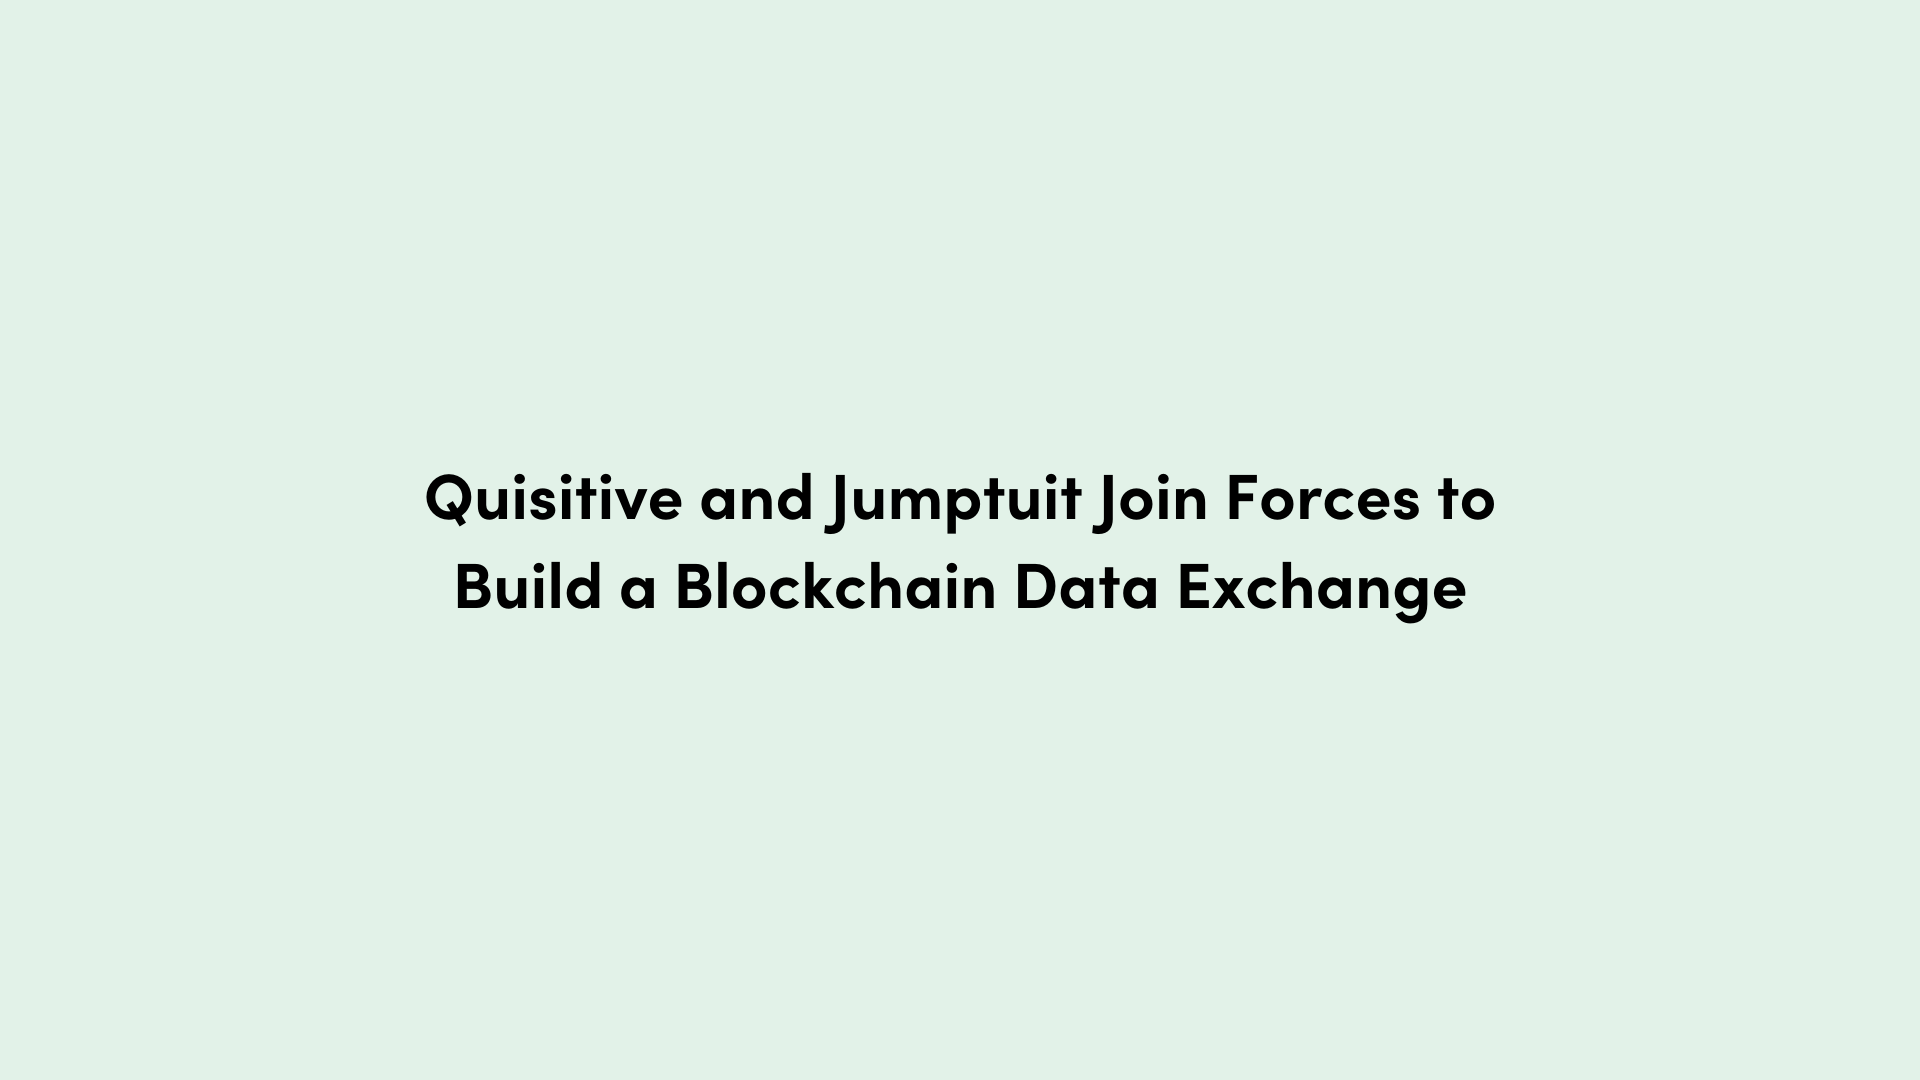 Green background with text that reads Quisitive and Jumptuit Join Forces to Build a Blockchain Data Exchange